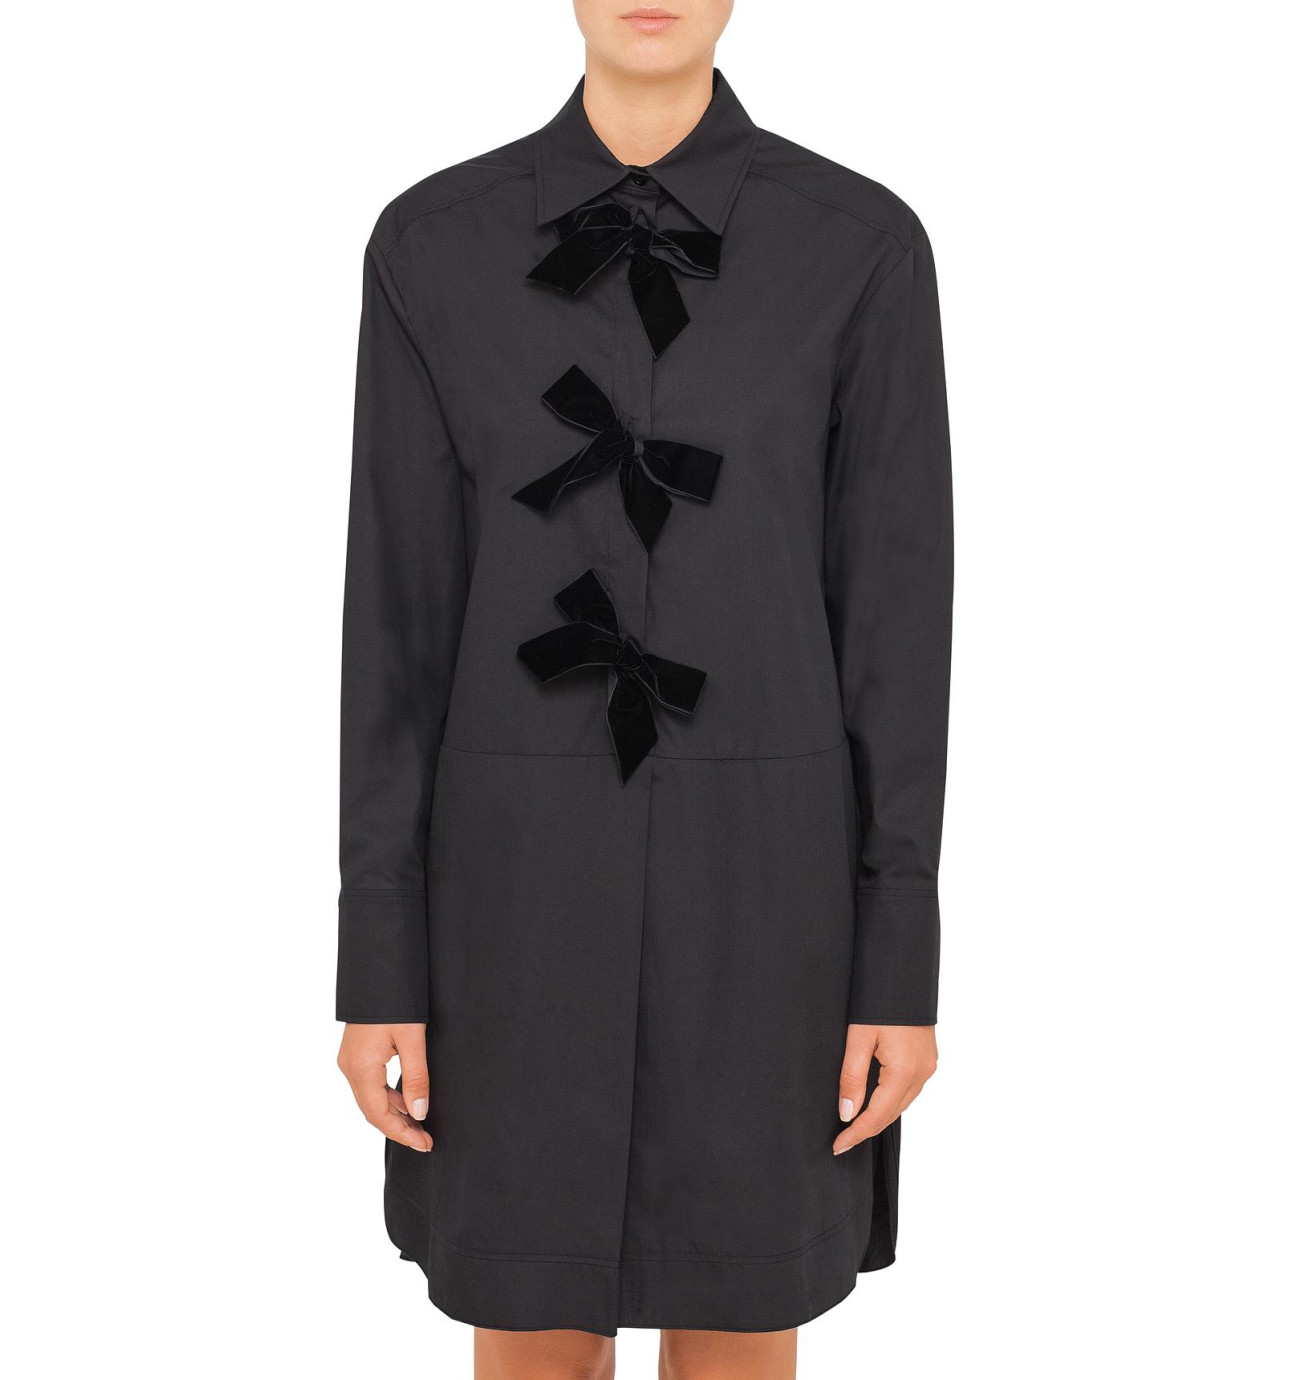 See by Chloé | Trapeze Poplin Dress With Bows | Women's dresses ...